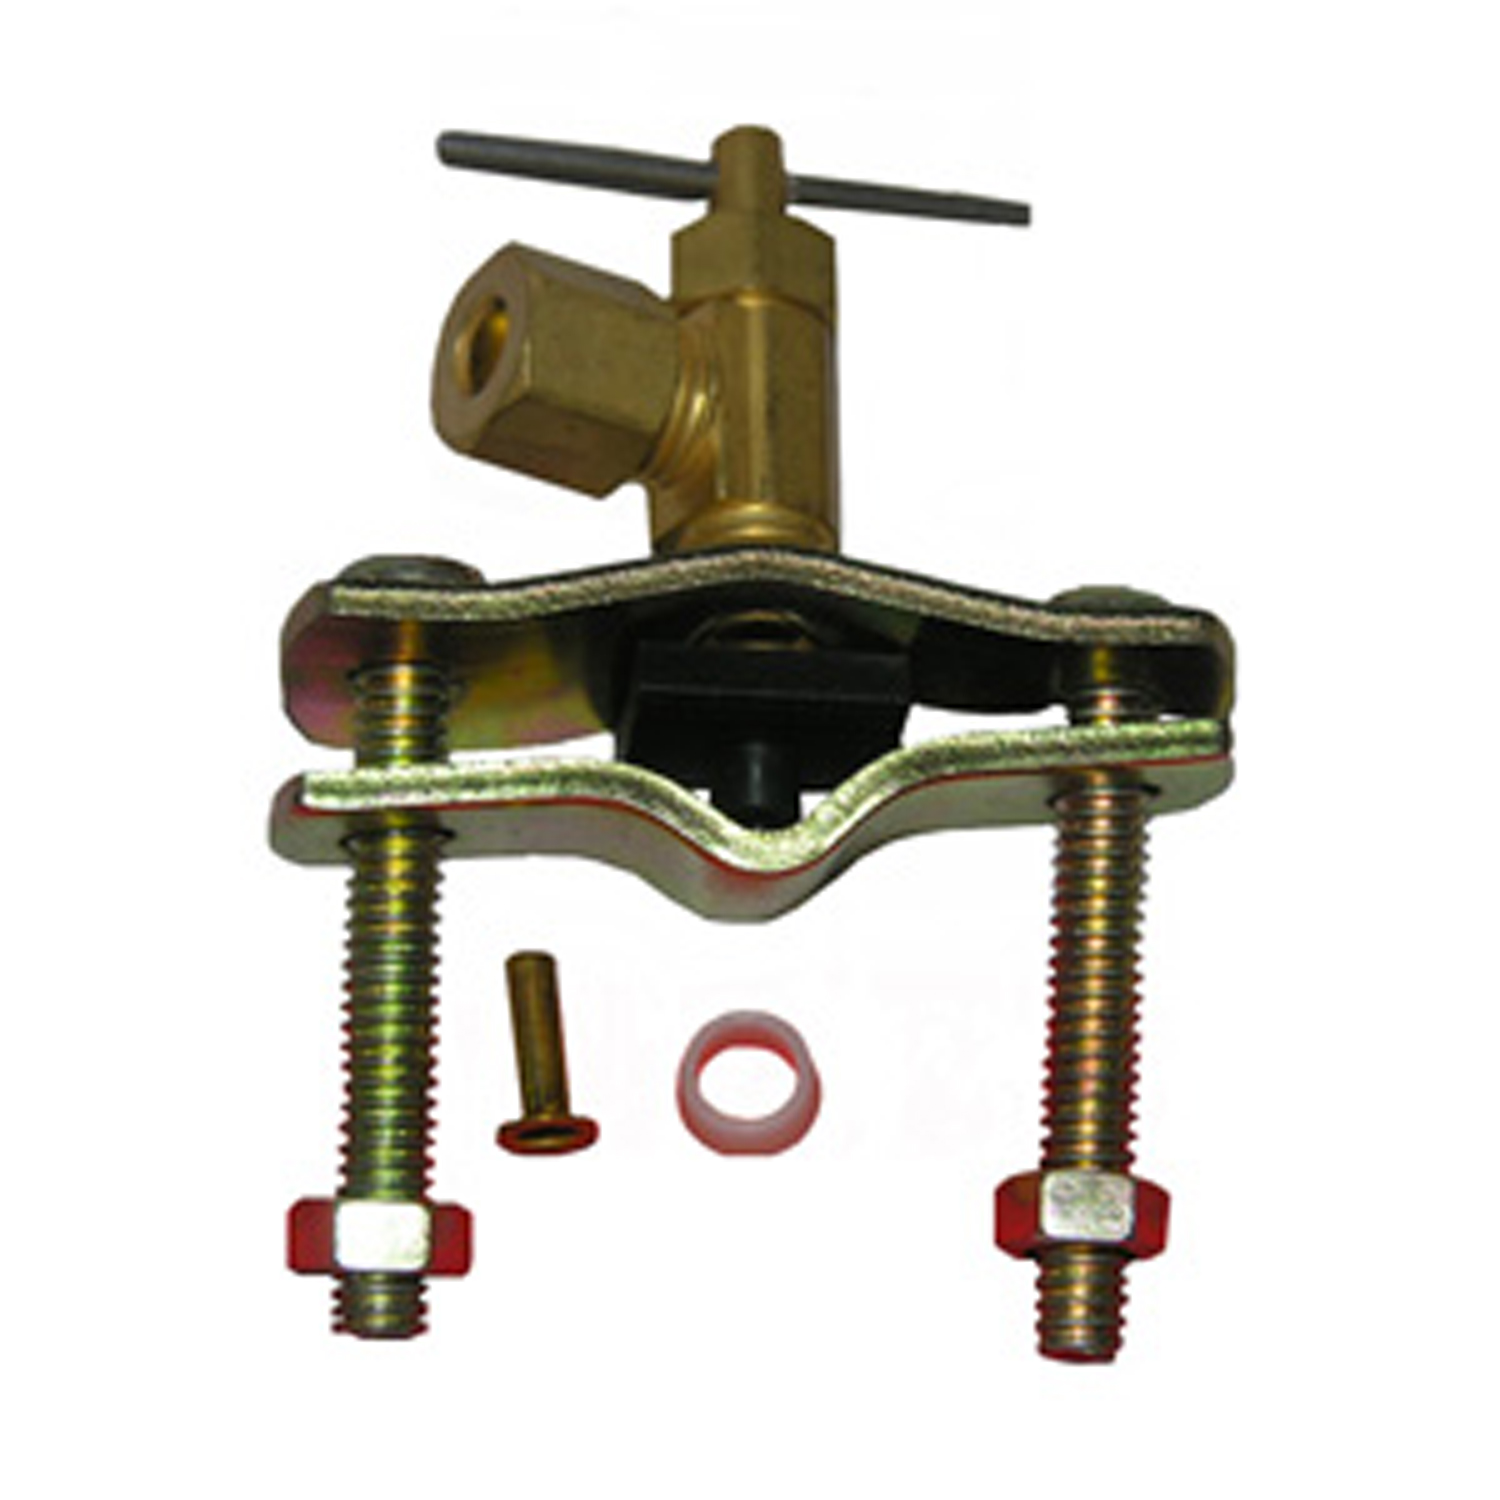 Lasco 17-0611 Saddle Needle Valve, 1/4 in Connection, Compression, Brass Body